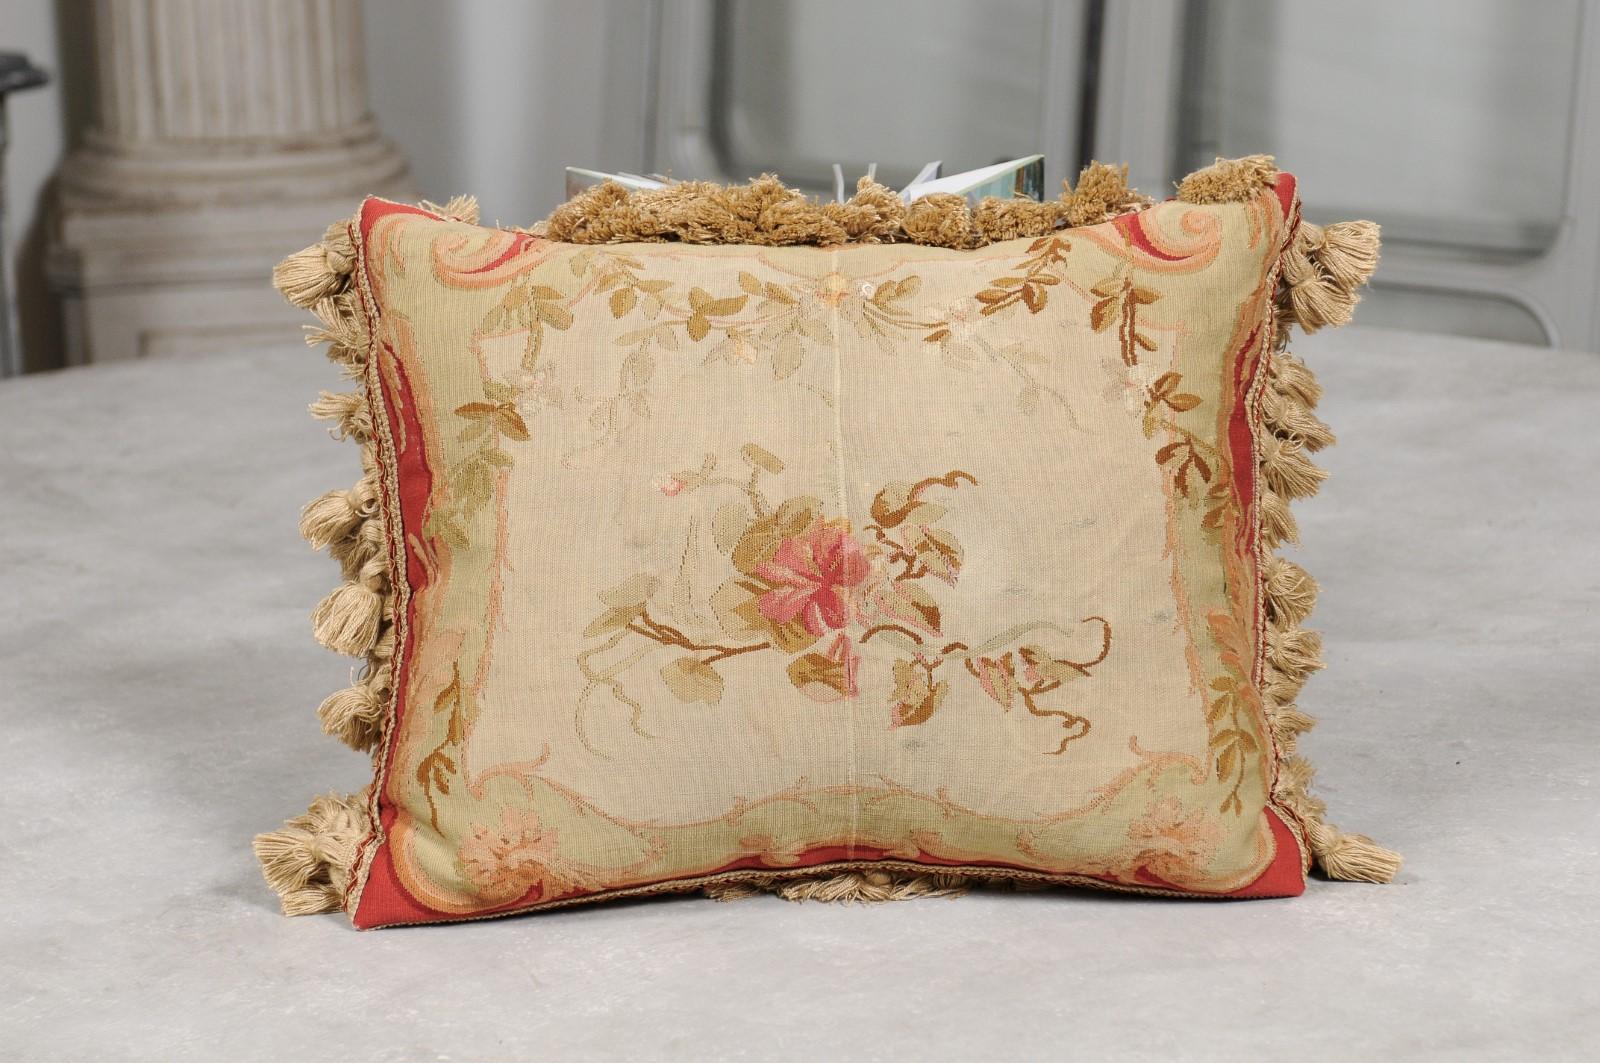 A French Aubusson tapestry pillow from the 19th century, with floral decor, foliage and small tassels. Created during the 19th century in the Aubusson tapestry manufacture located in central France, this horizontal pillow is adorned with a central